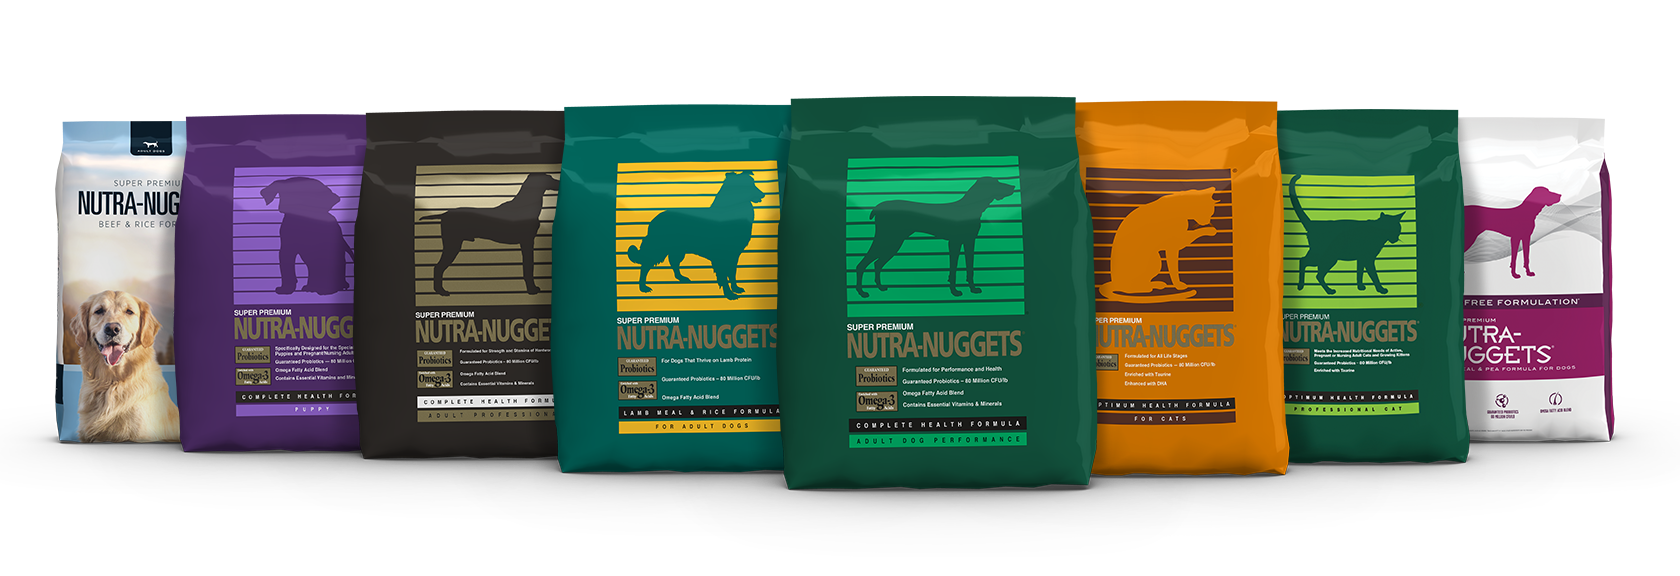 Nutra-Nuggets US Family of Products | Nutra-Nuggets